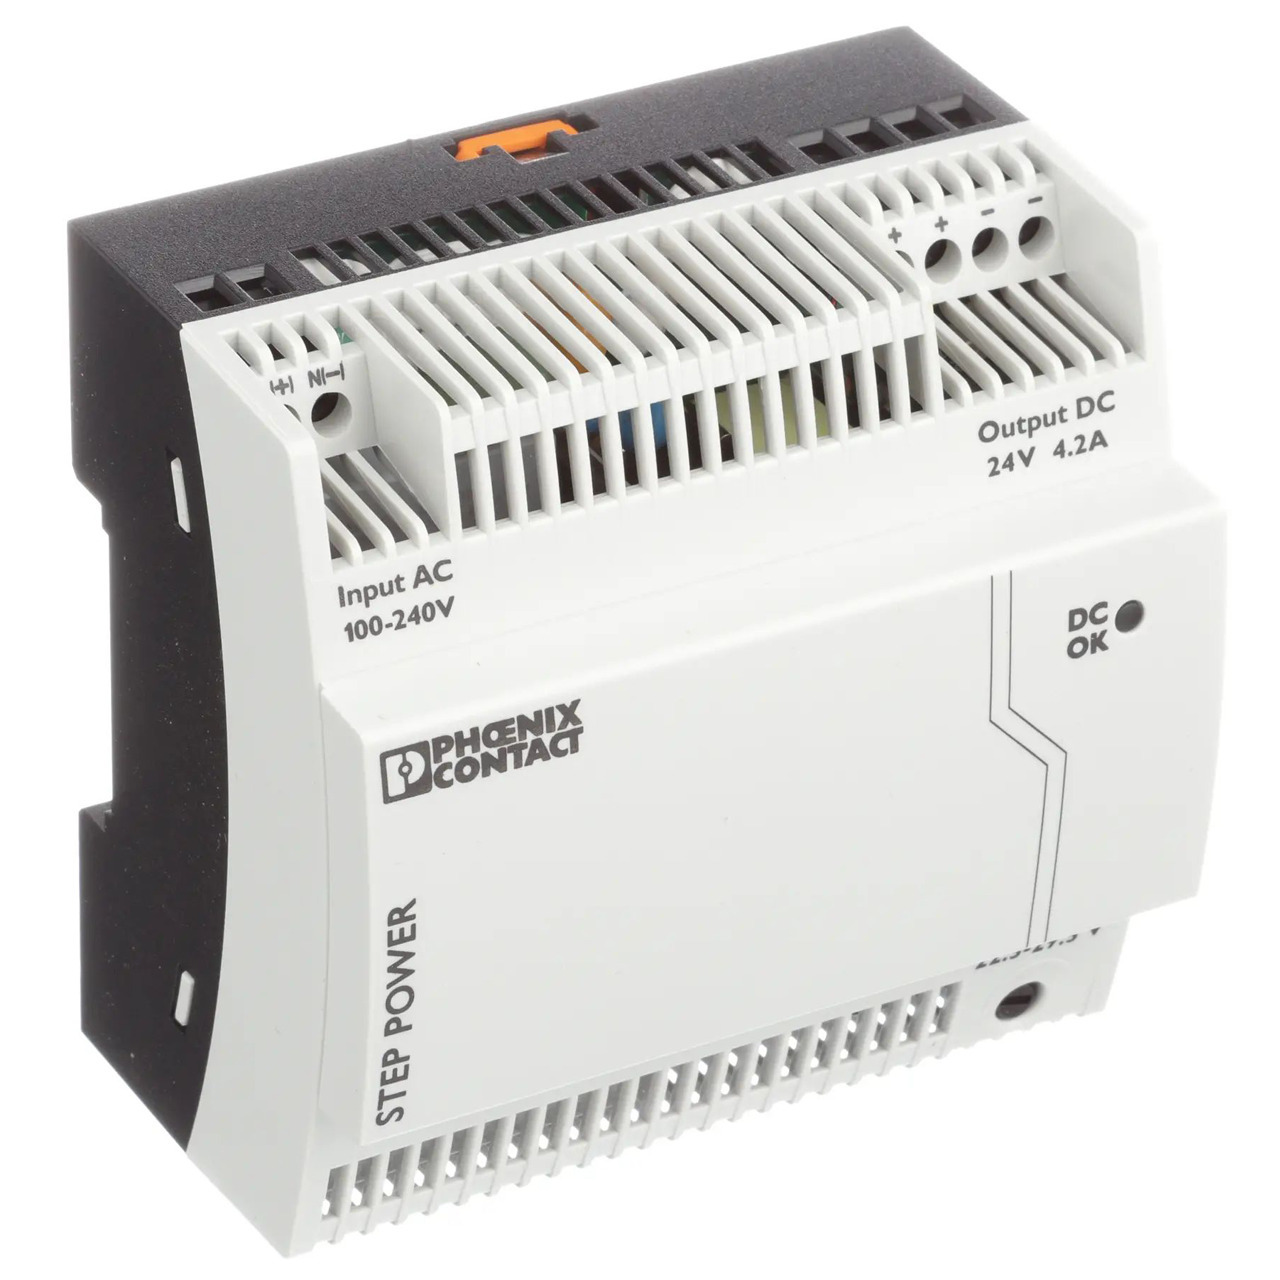 PHOENIX CONTACT 24-V-DC-Hutschienennetzteil STEP-PS-1AC-24DC-4-2- 4-2 A- 1-phasig unter Hausautomation